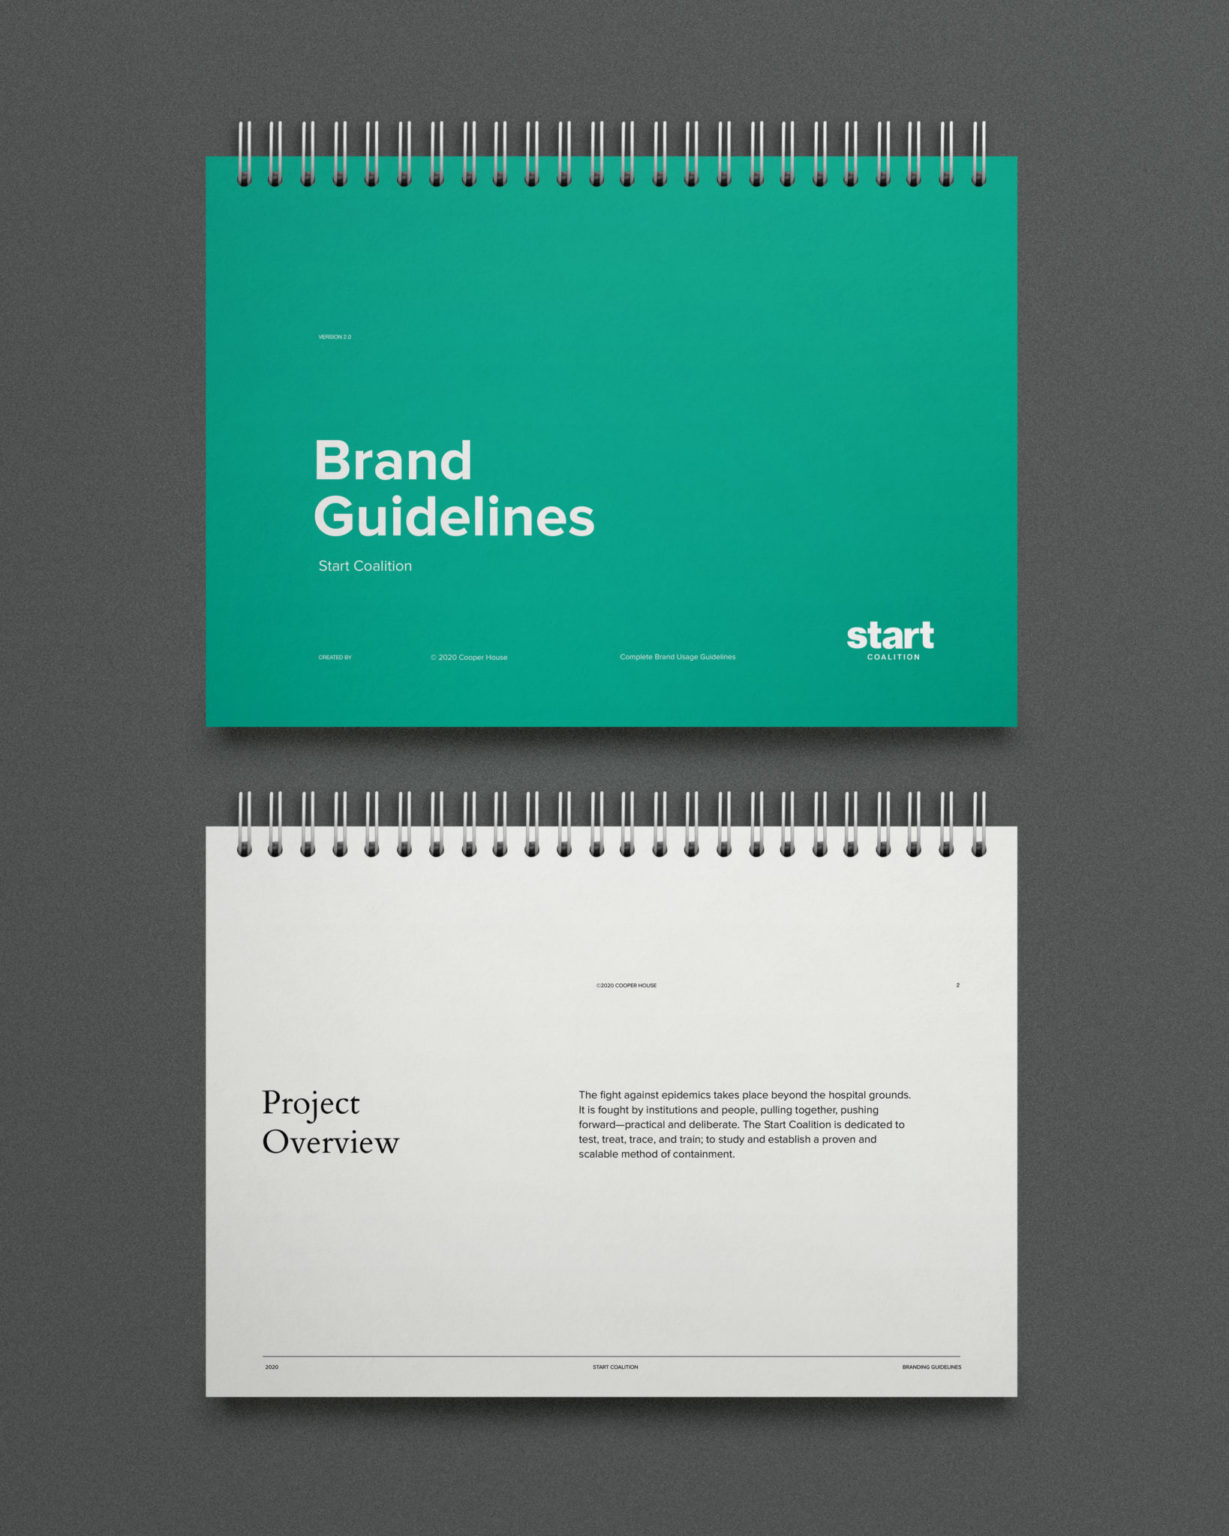 Brand Guidelines book for the START Coalition